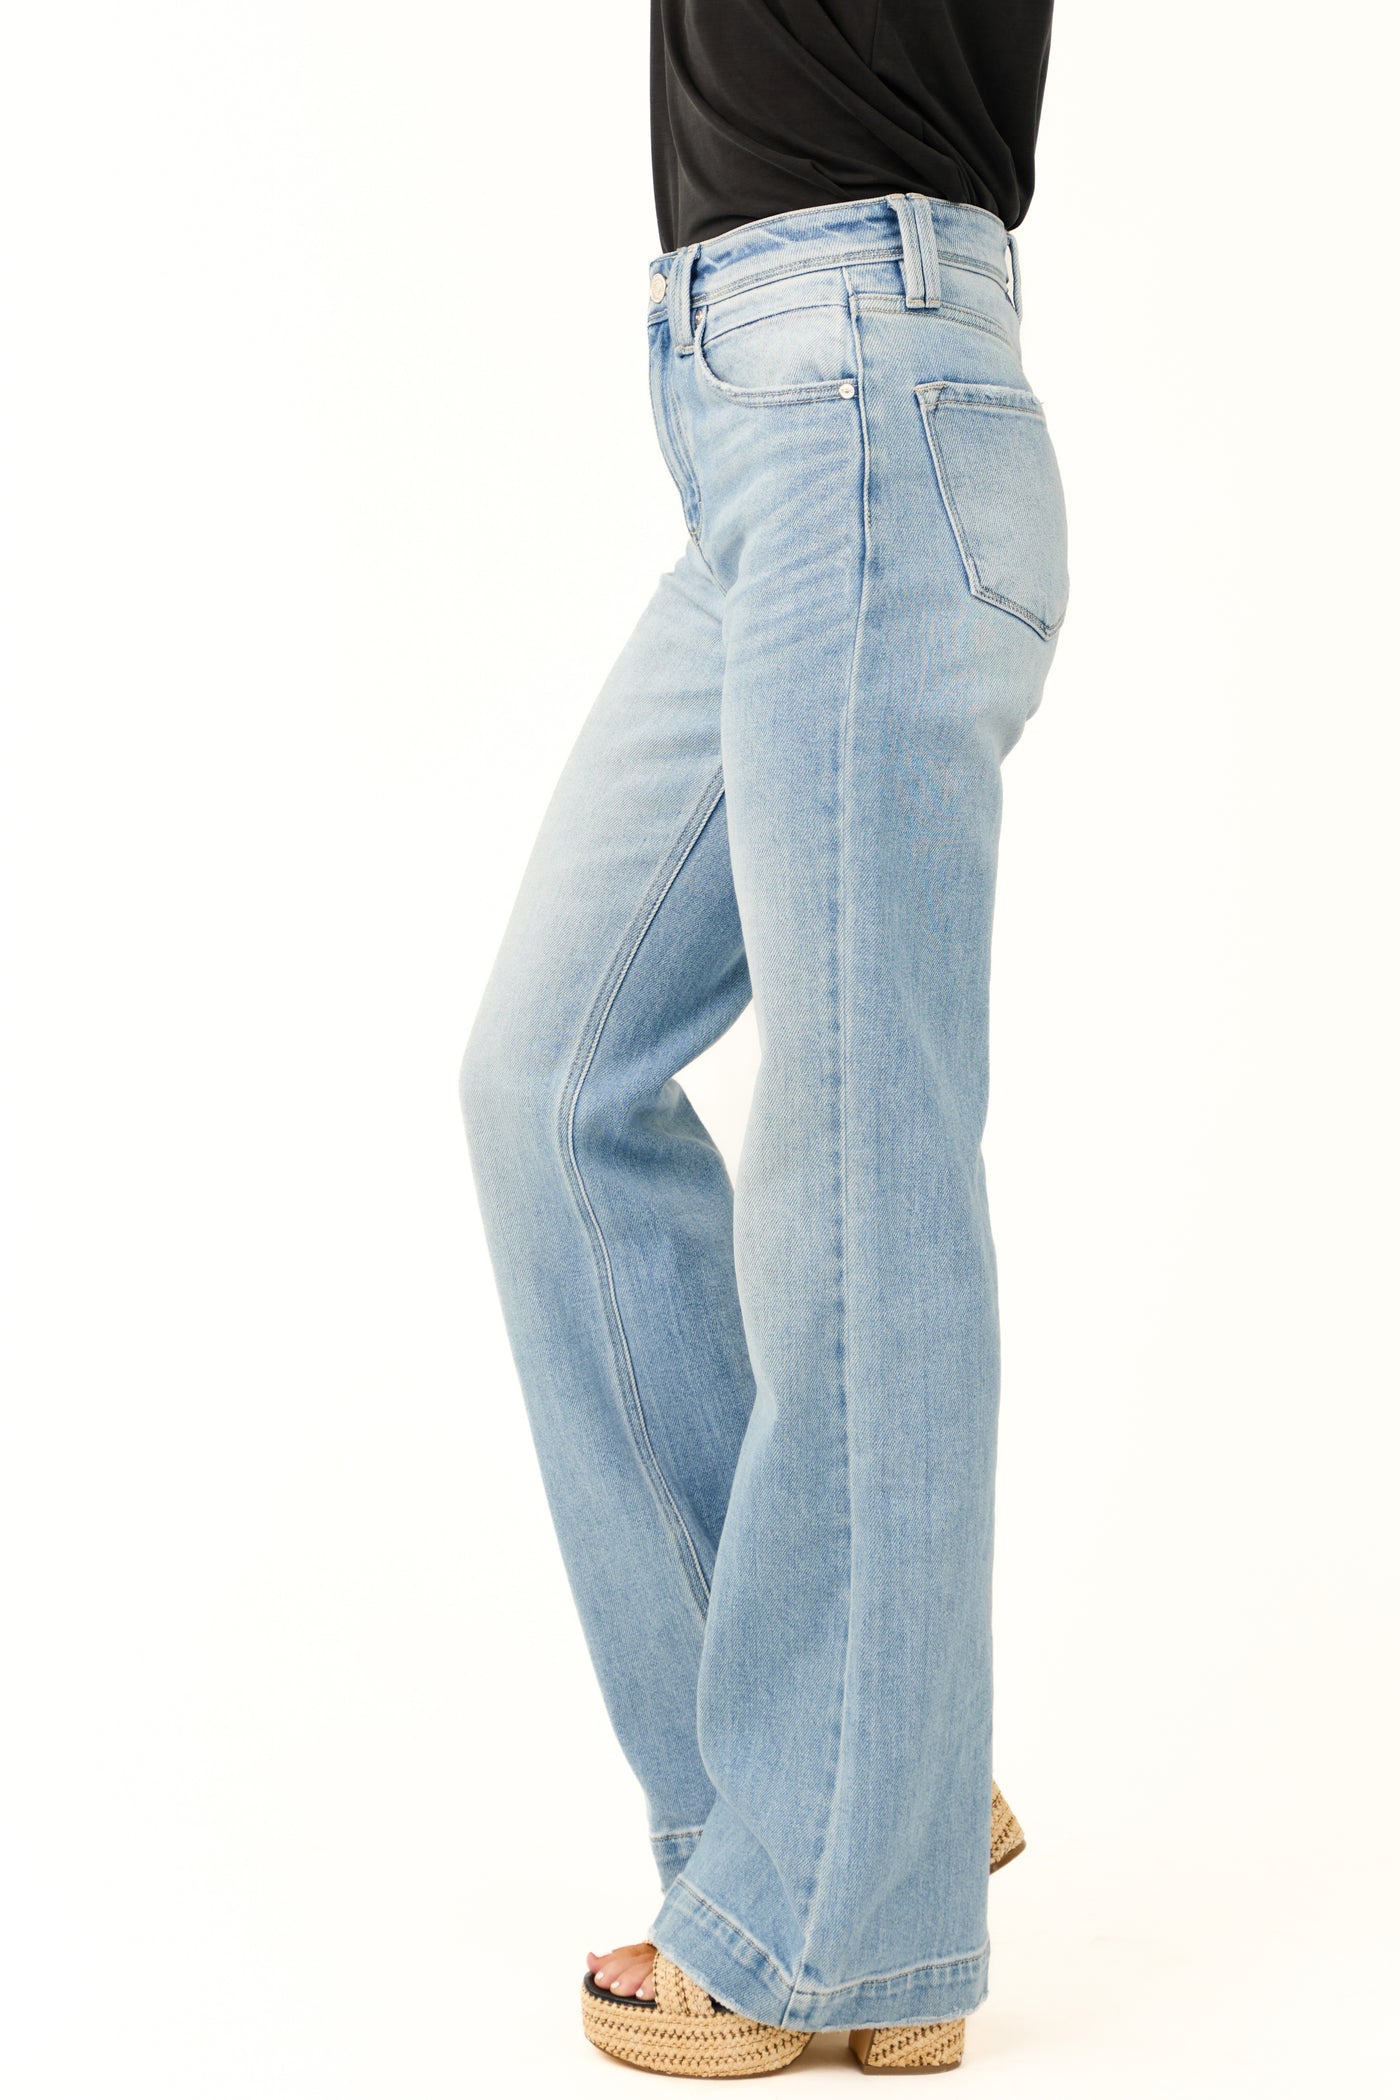 KanCan Light Wash High Rise Wide Relaxed Denim Jeans